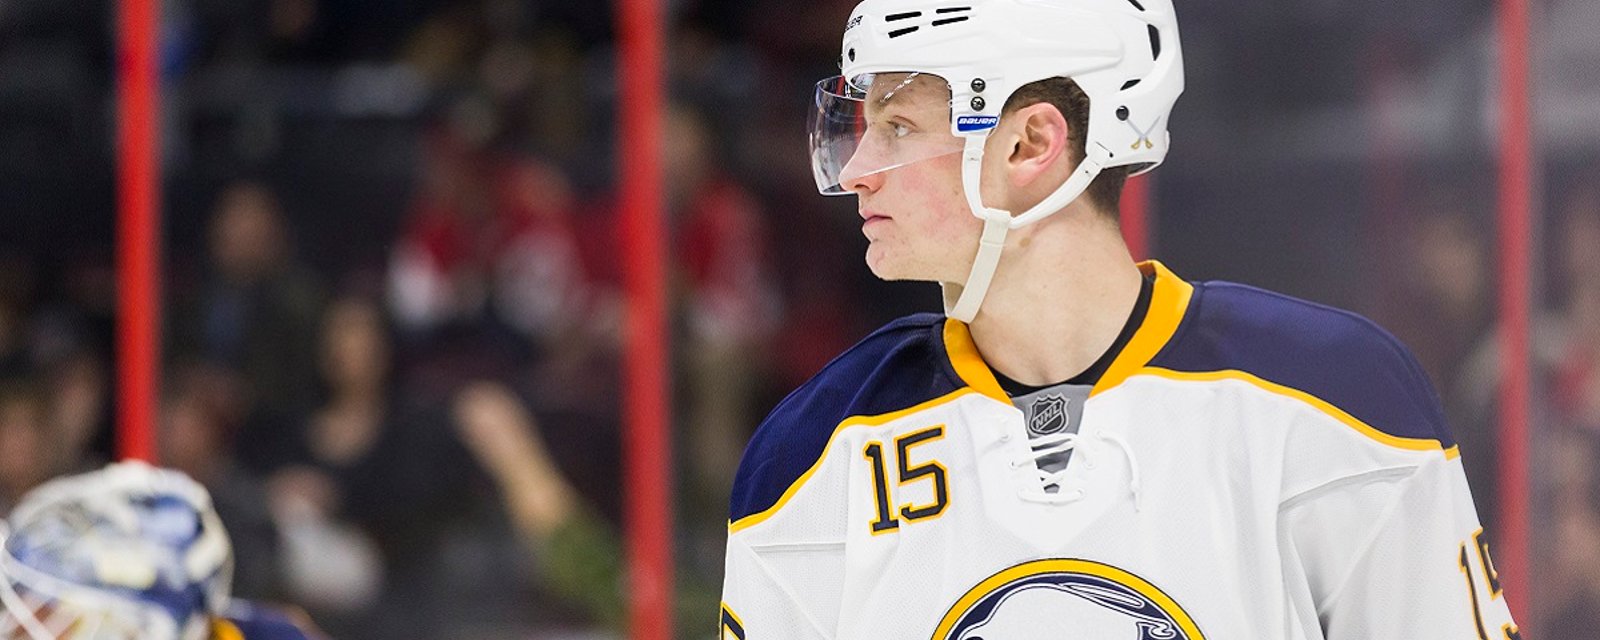 Breaking: Medical staff confirms injury to Jack Eichel is severe.